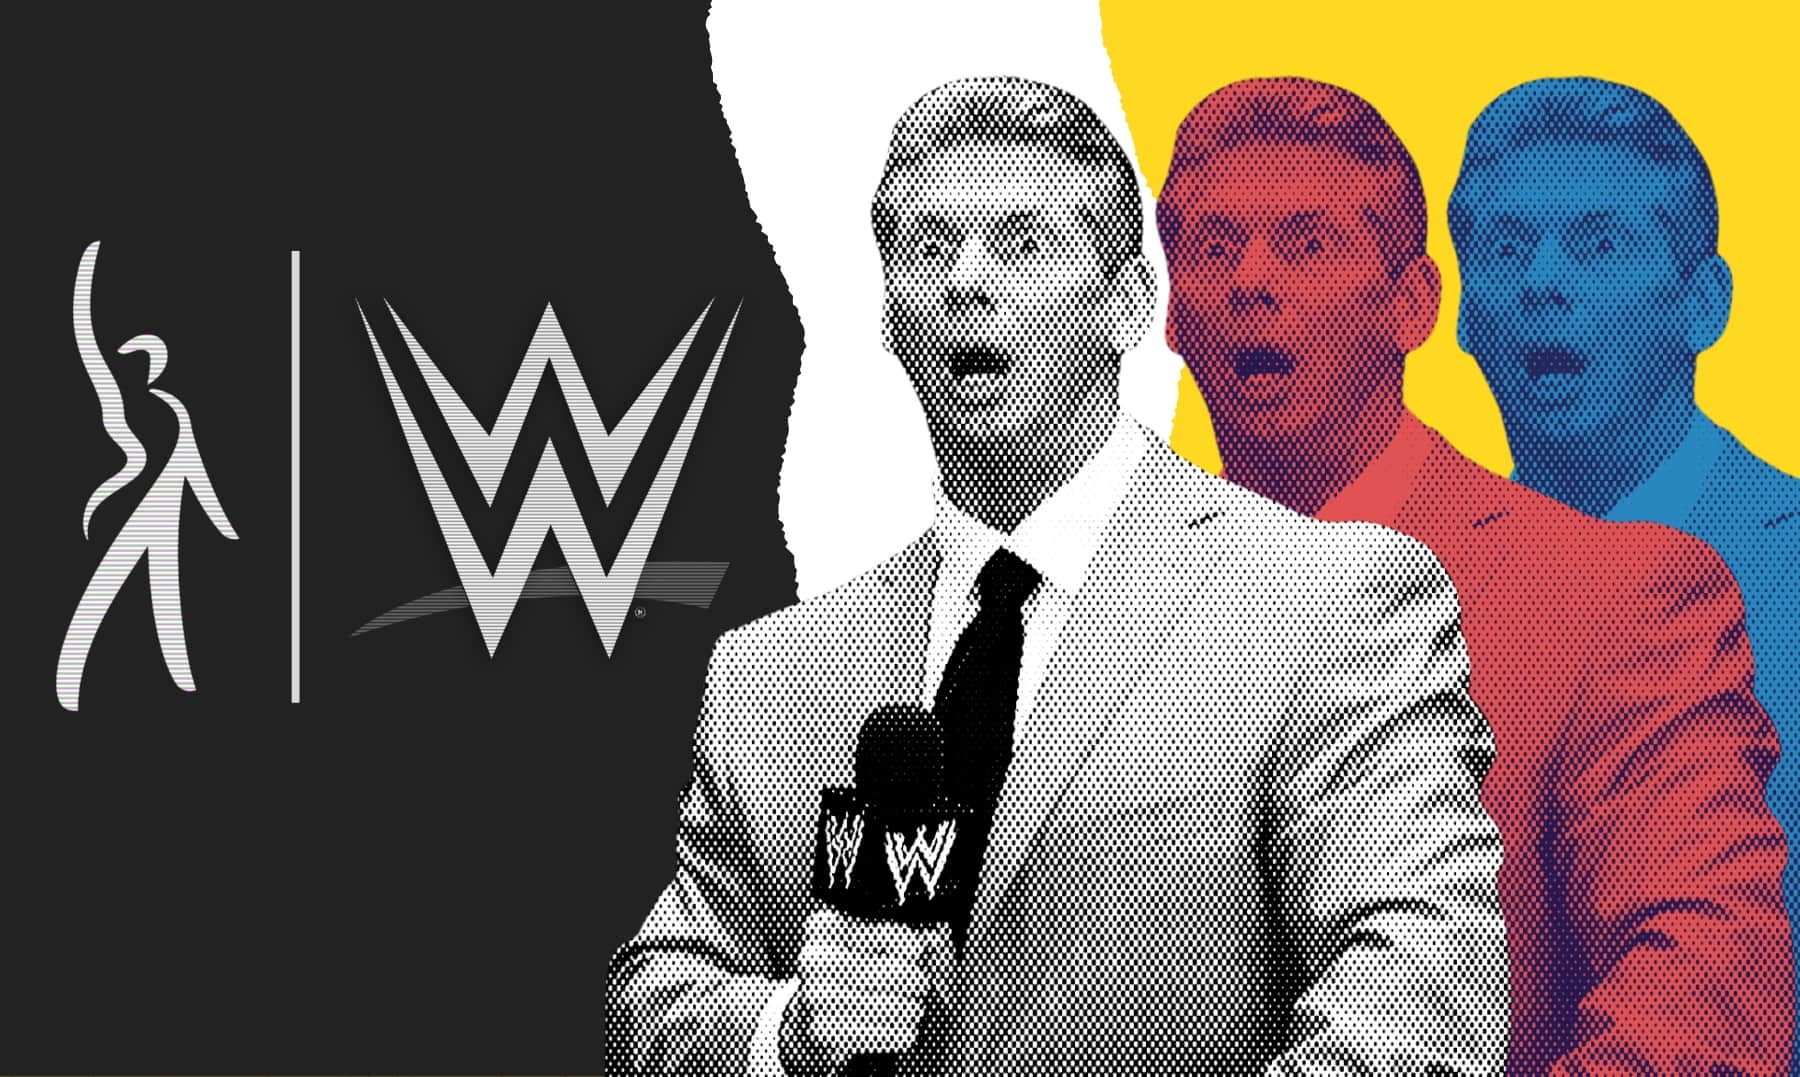 wwe synidcat vince mcmahon